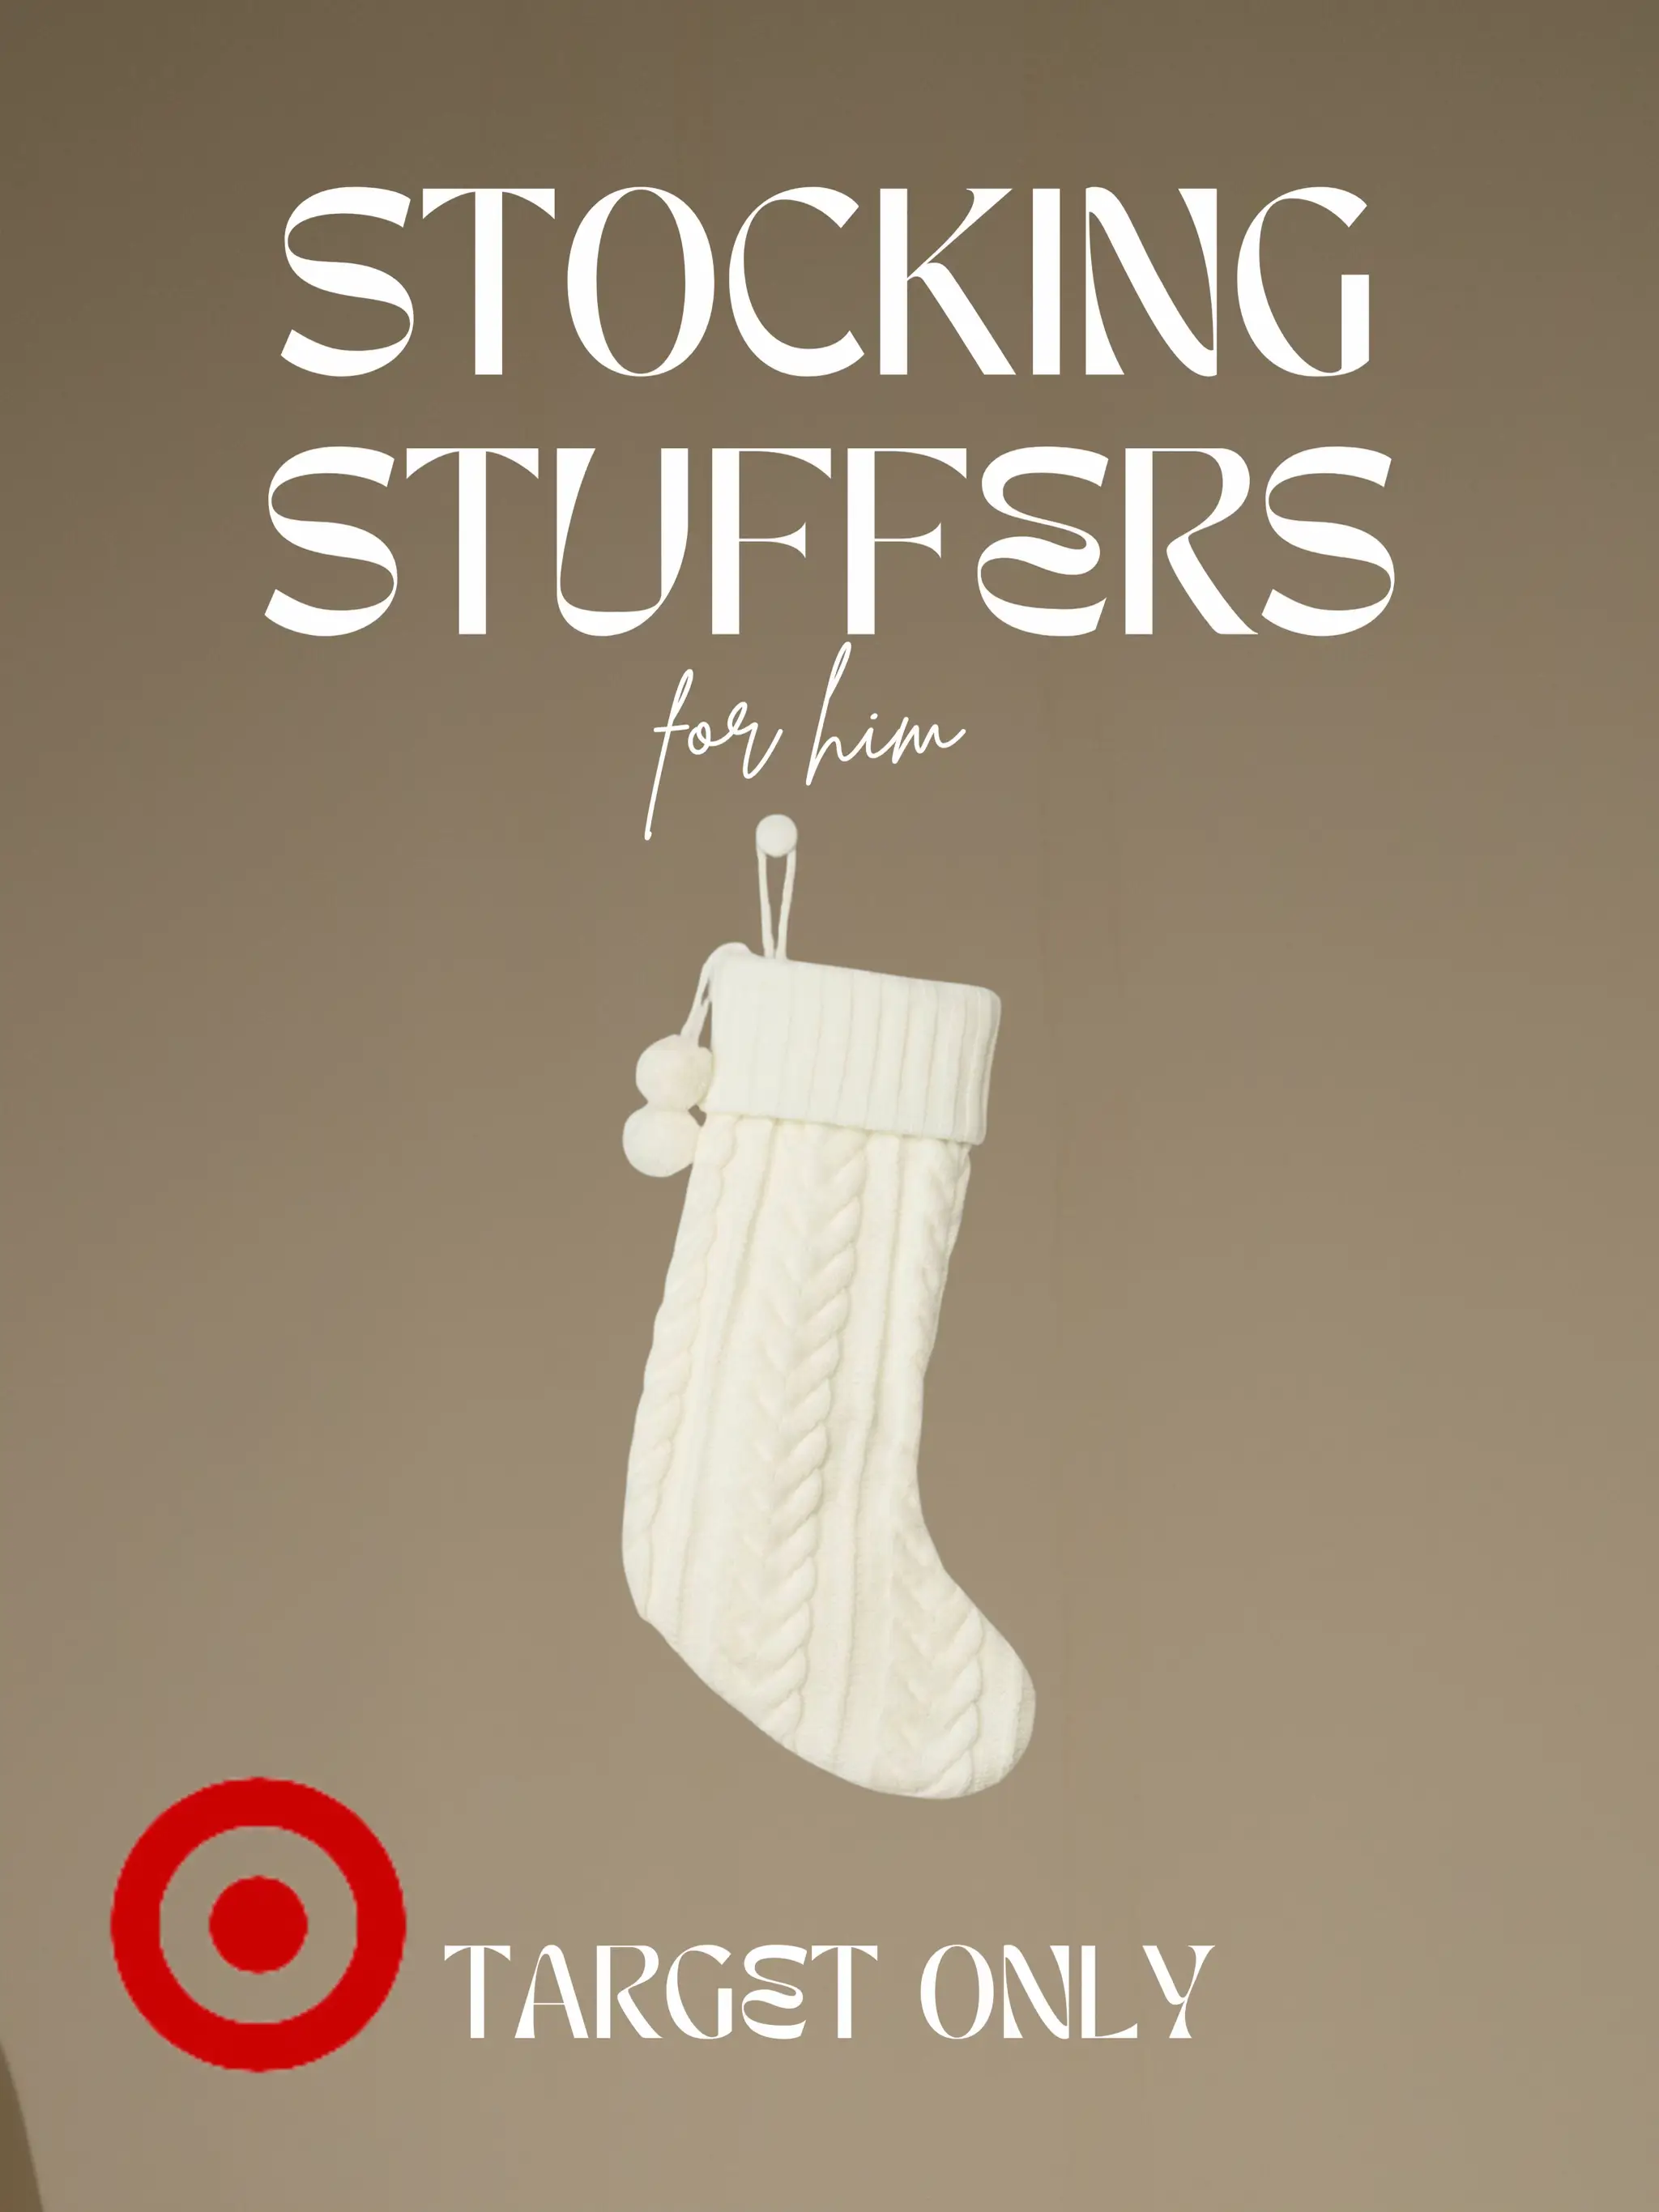 Gifts Under $25 & Stocking Stuffers - Life with Emily